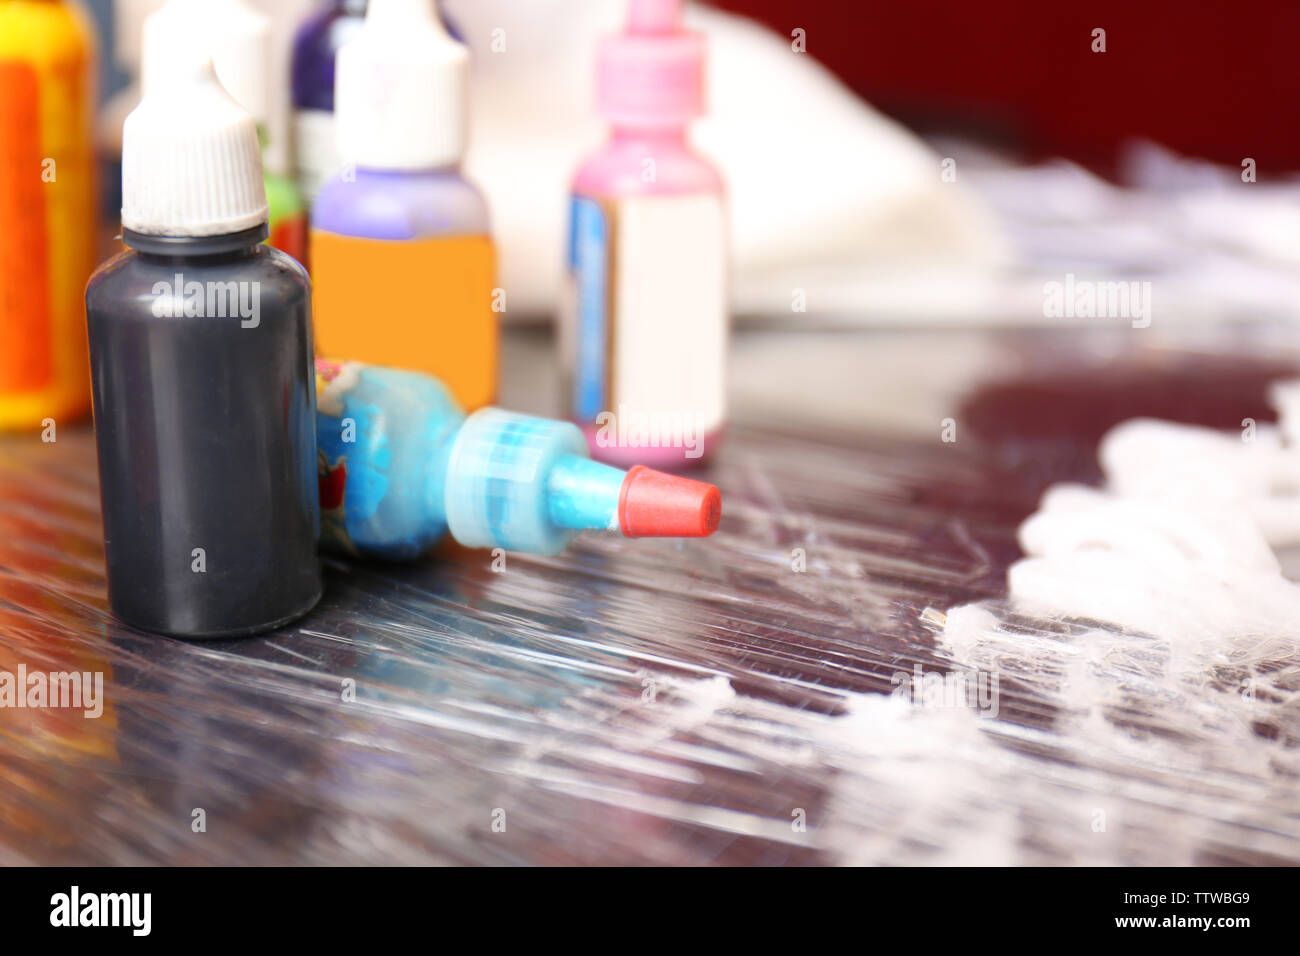 Bottles with tattoo colorful inks and petroleum jelly on wooden table, close up view Stock Photo